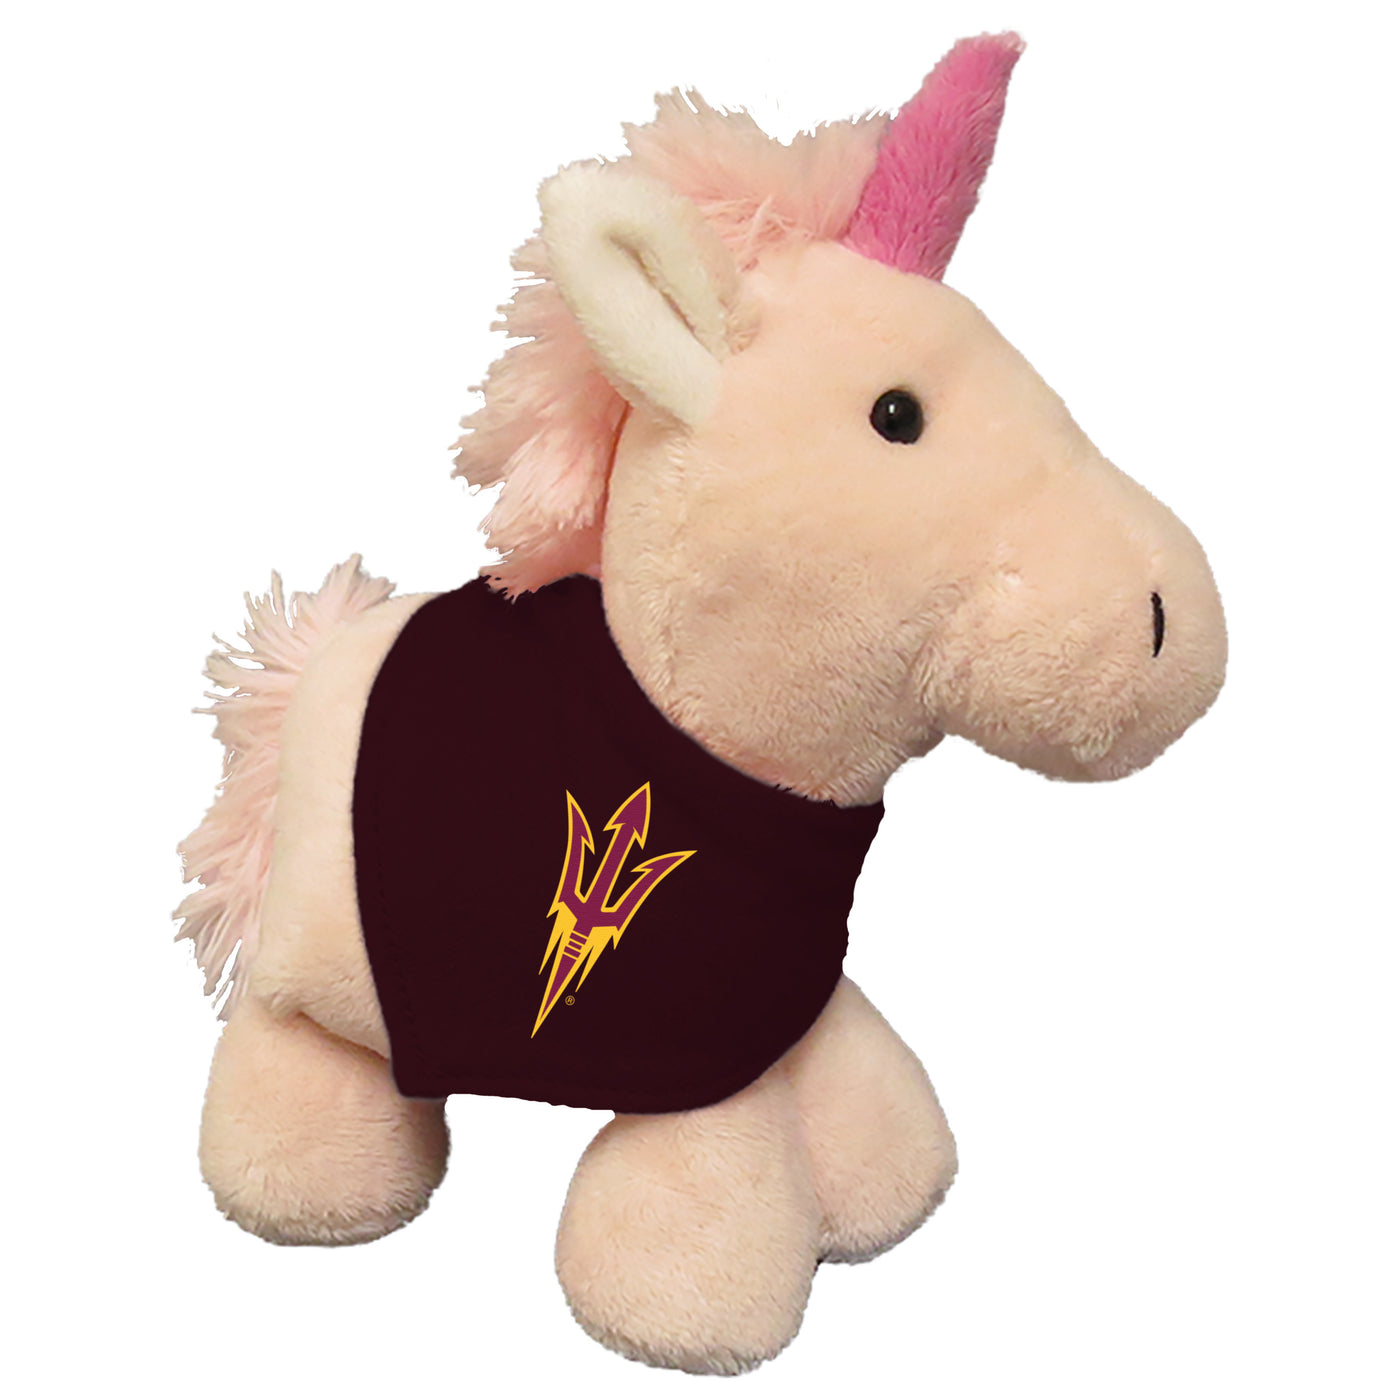 ASU Stuffed pink unicorn with a brighter pink horn. Wearing a maroon bandanna around its neck featuring the pitchfork logo. 